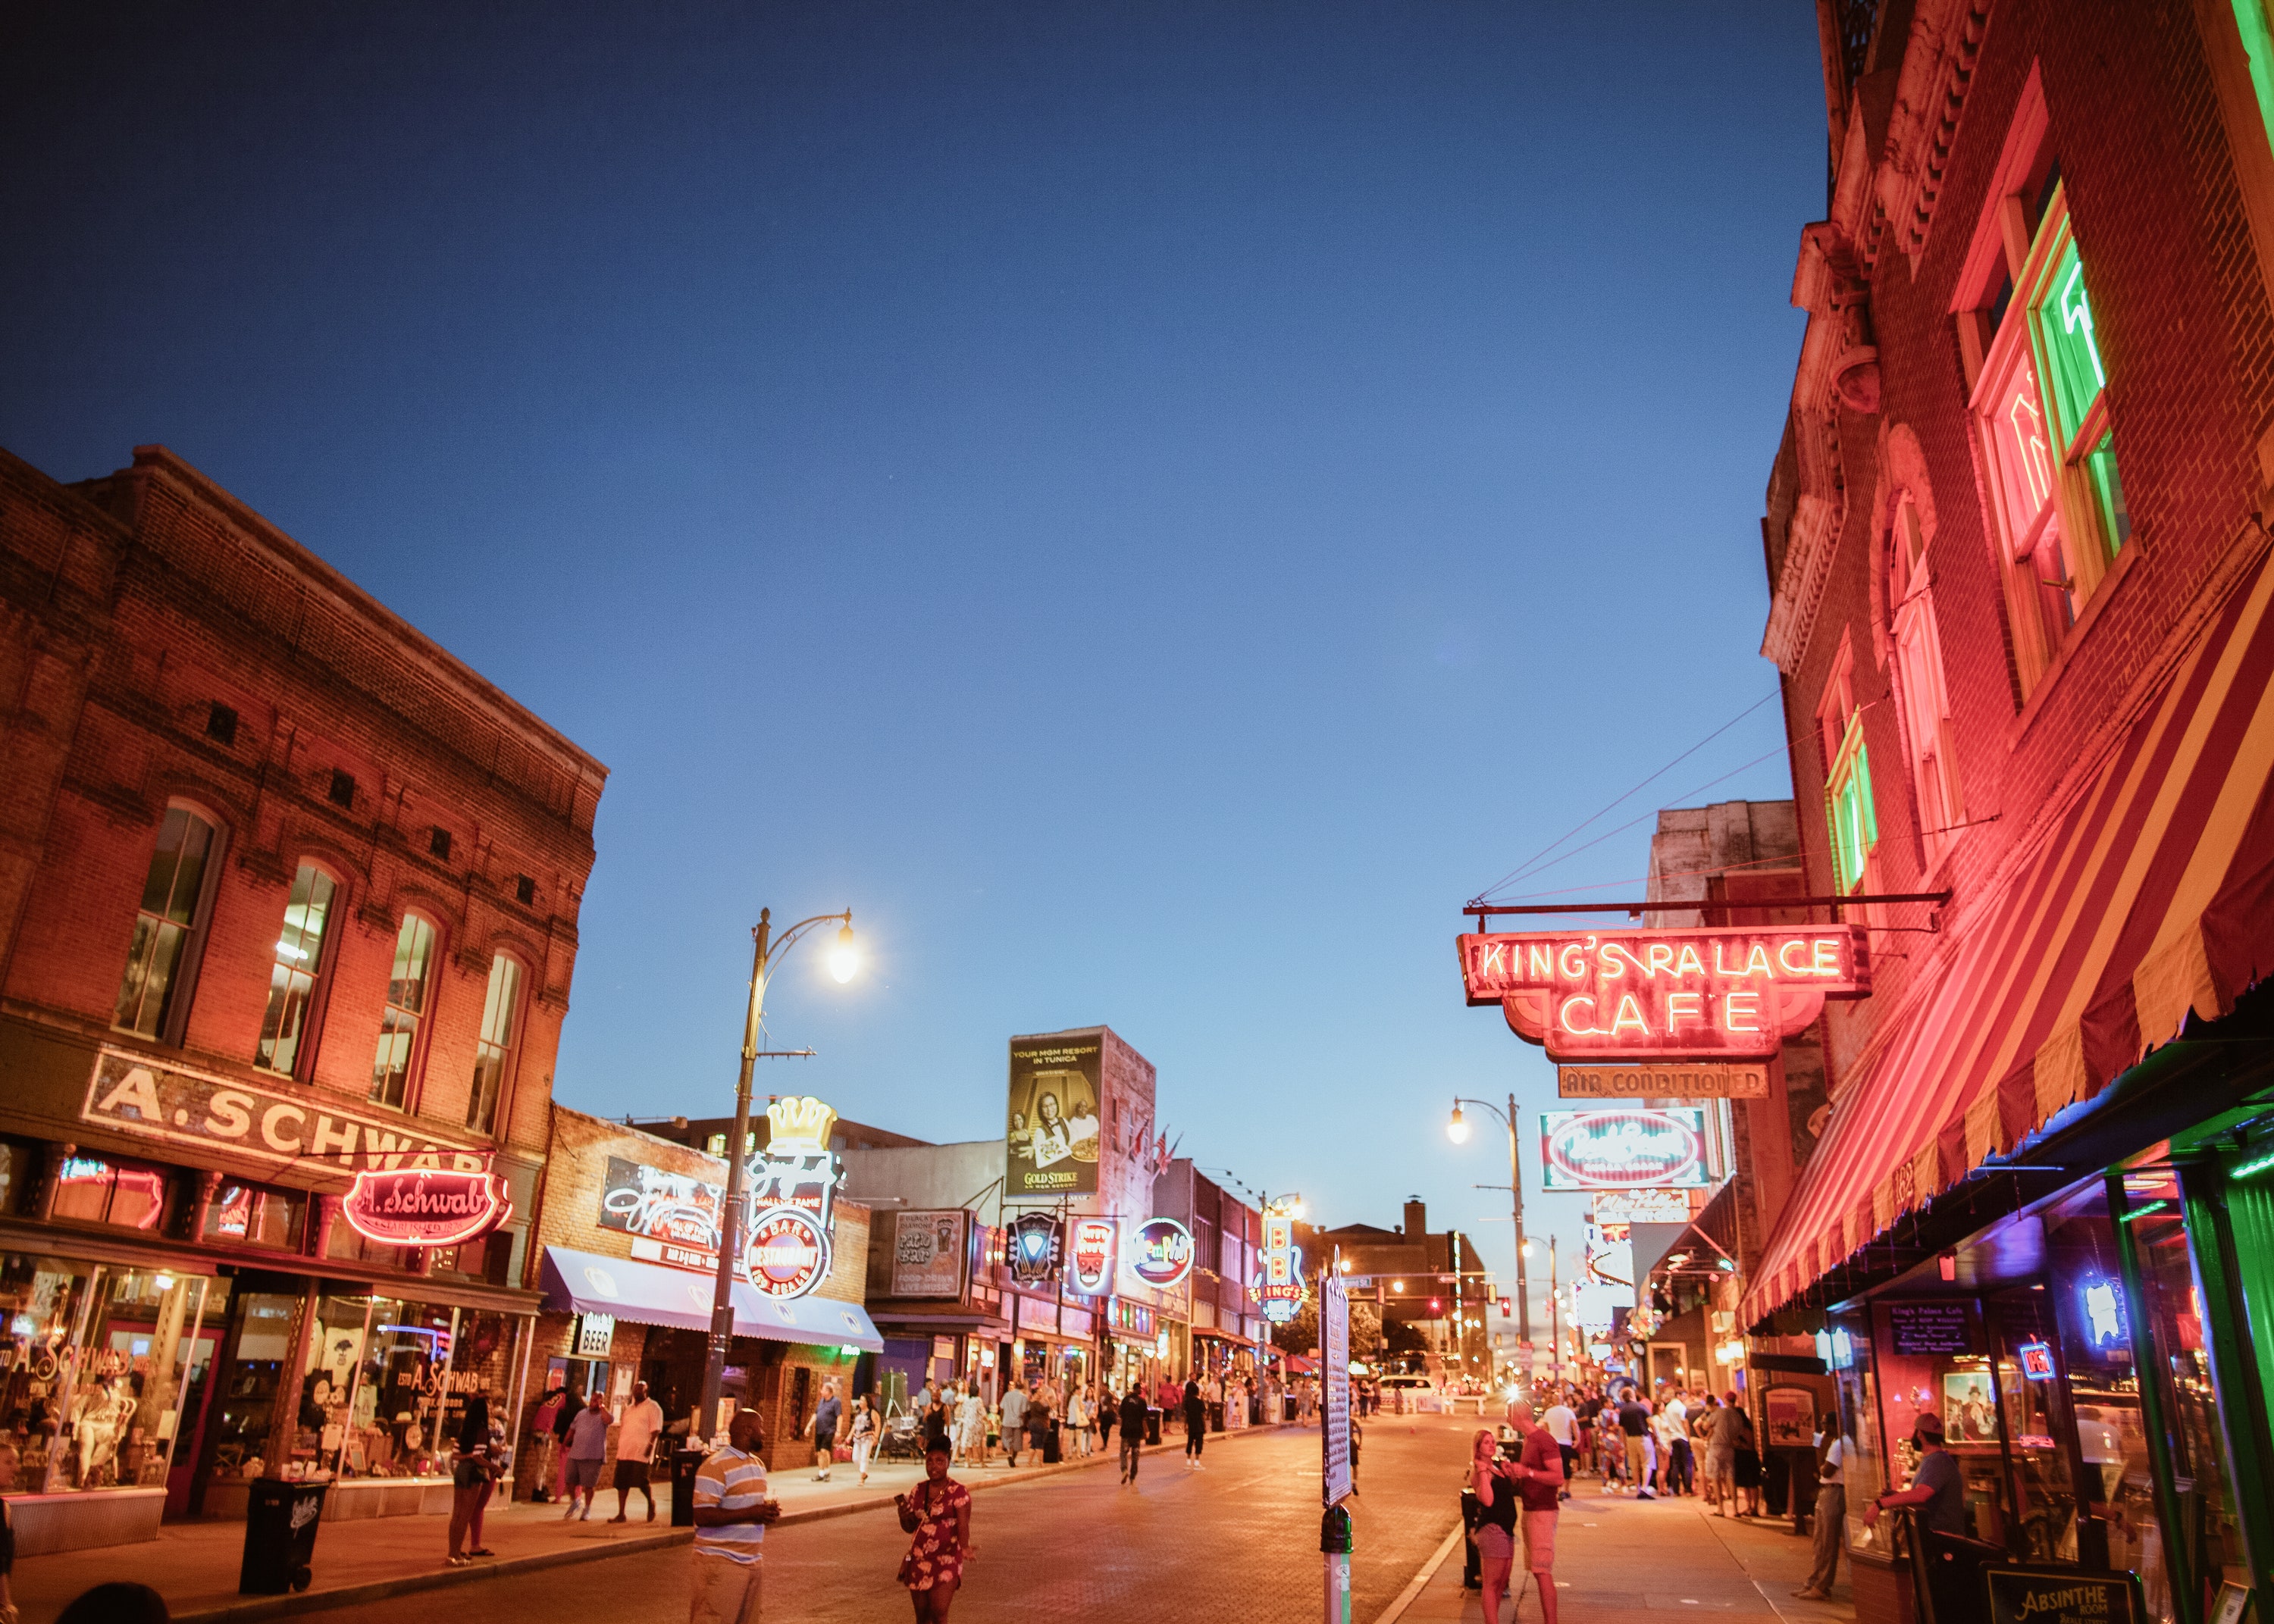 Beale Street’s bars and clubs thrum nightly with hip-hop and live Delta blues, but <a href="https://paularaifords.com/home.html">Paula & Raifords Disco</a> is the best spot to really dance up a storm on your big 2-1. The morning-after plan: Stroll <a href="http://www.bigrivercrossing.com/">Big River Crossing</a>, the Mississippi’s largest pedestrian bridge, or the 4,500-acre <a href="https://www.shelbyfarmspark.org/">Shelby Farms Park</a>. Make a date with the King at <a href="https://www.graceland.com/">Graceland</a>, then steer your crew over to the South Main Arts District, where <a href="https://wiseacrebrew.com/">Wiseacre Brewing Company</a>, <a href="https://olddominick.com/">Old Dominick</a> distillery, and <a href="https://www.ghostriverbrewing.com/">Ghost River Brewing Co.</a> sit within walking distance of <a href="https://cna.st/affiliate-link/3kFAWYpoG8awFiLXA6FR7WWRLvVcg6ic7y44ndcpT8BEdy1pStYtrJfLbdB2xpFbcRxLuuB3nNfNoQo7ZdCwENvnNyL37h1jYmPviiwHfemjPoSfPTwJm7Pt1Z1emKP2y7uQGj9qQkNDK5wcizpLDK1PaqUnzhwmnehfsHMpPY4GDd1XVG4bNbrLLswybL3prAZqi" rel="sponsored">Arrive Memphis</a>. The 62-room boutique hotel serves as the perfect home base, no matter <a href="https://www.cntraveler.com/story/where-the-world-eats-after-hours?mbid=synd_msn_rss&utm_source=msn&utm_medium=syndication">how late your partying goes</a>.<p>Sign up to receive the latest news, expert tips, and inspiration on all things travel.</p><a href="https://www.cntraveler.com/newsletter/the-daily?sourceCode=msnsend">Inspire Me</a>